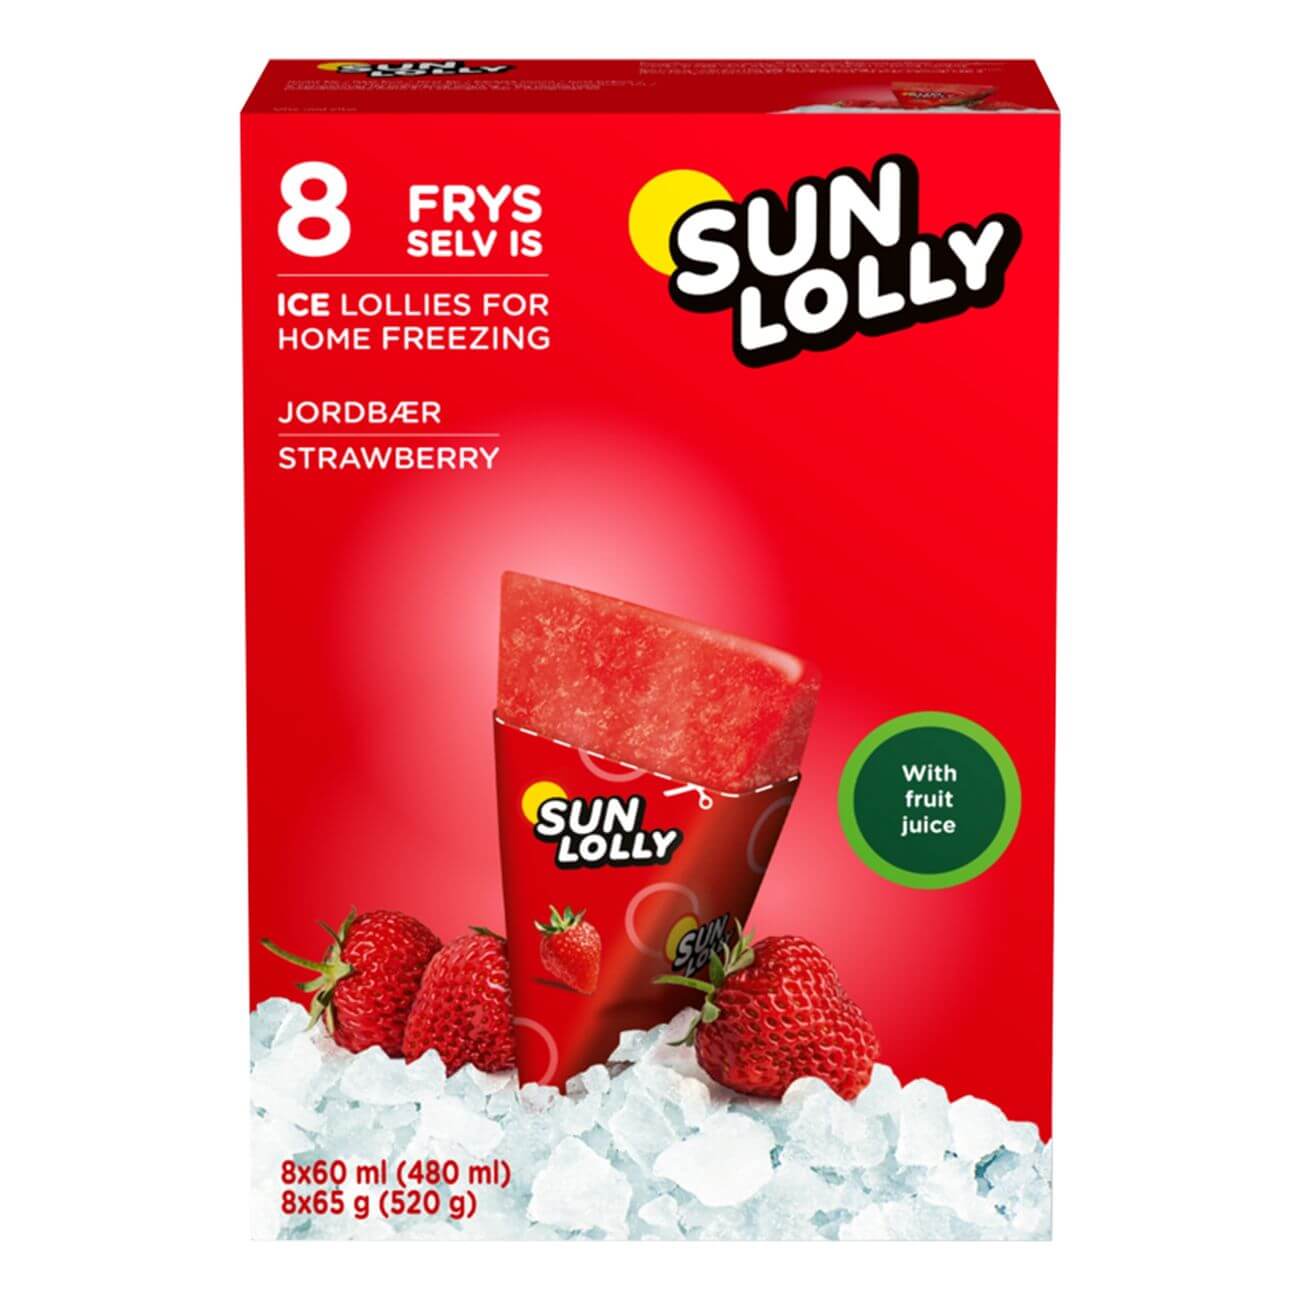 Sun Lolly Ice Lollies - Strawberry 520g